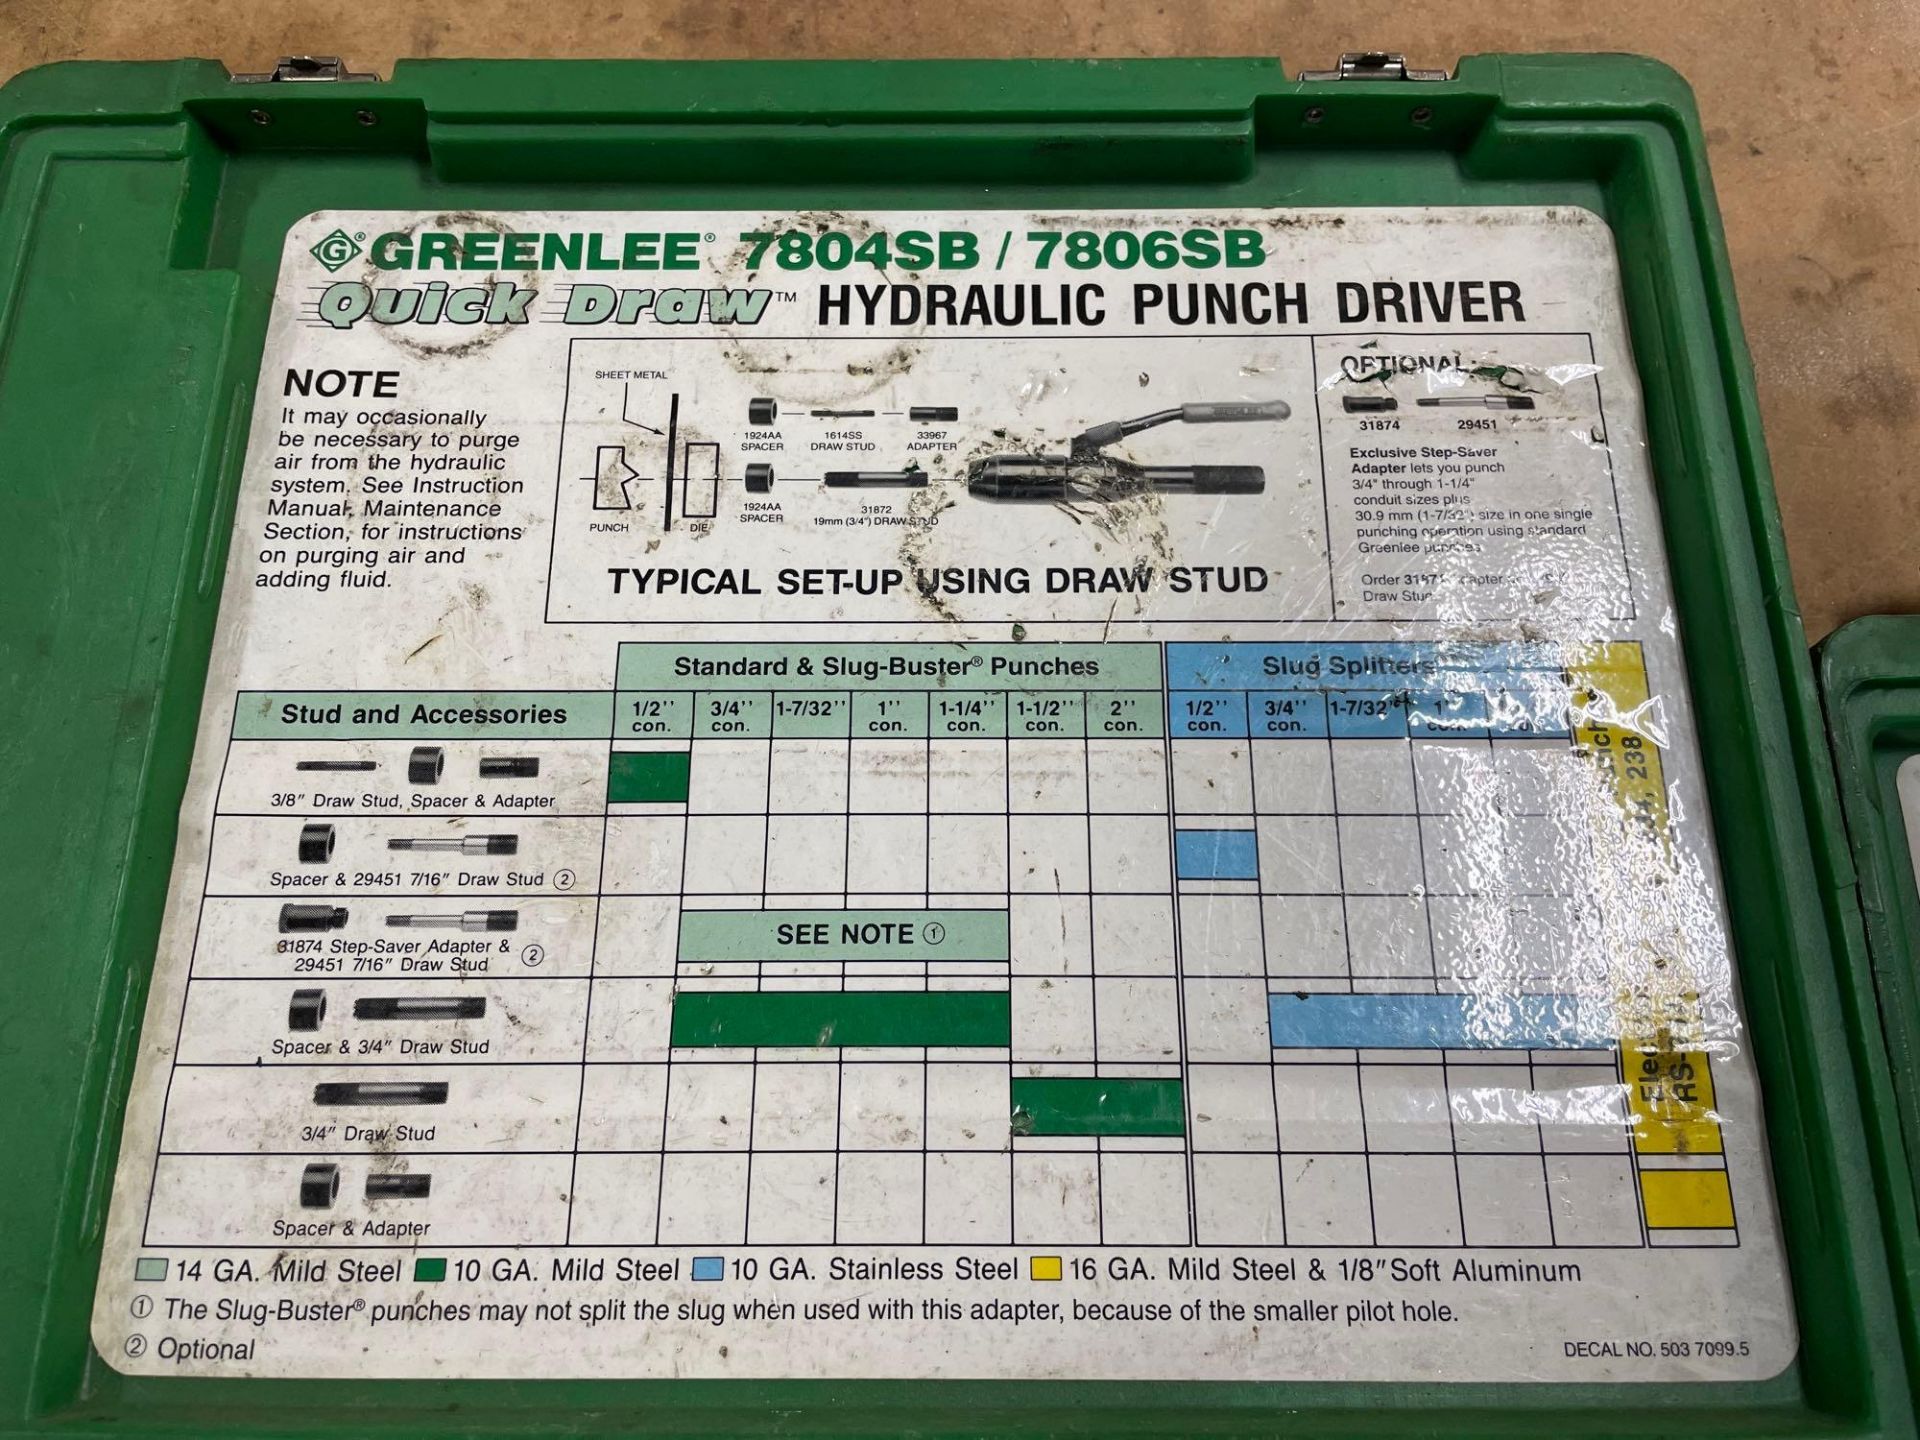 Greenlee Hydraulic Punch Driver/Knockout Punch Kits - Image 3 of 5